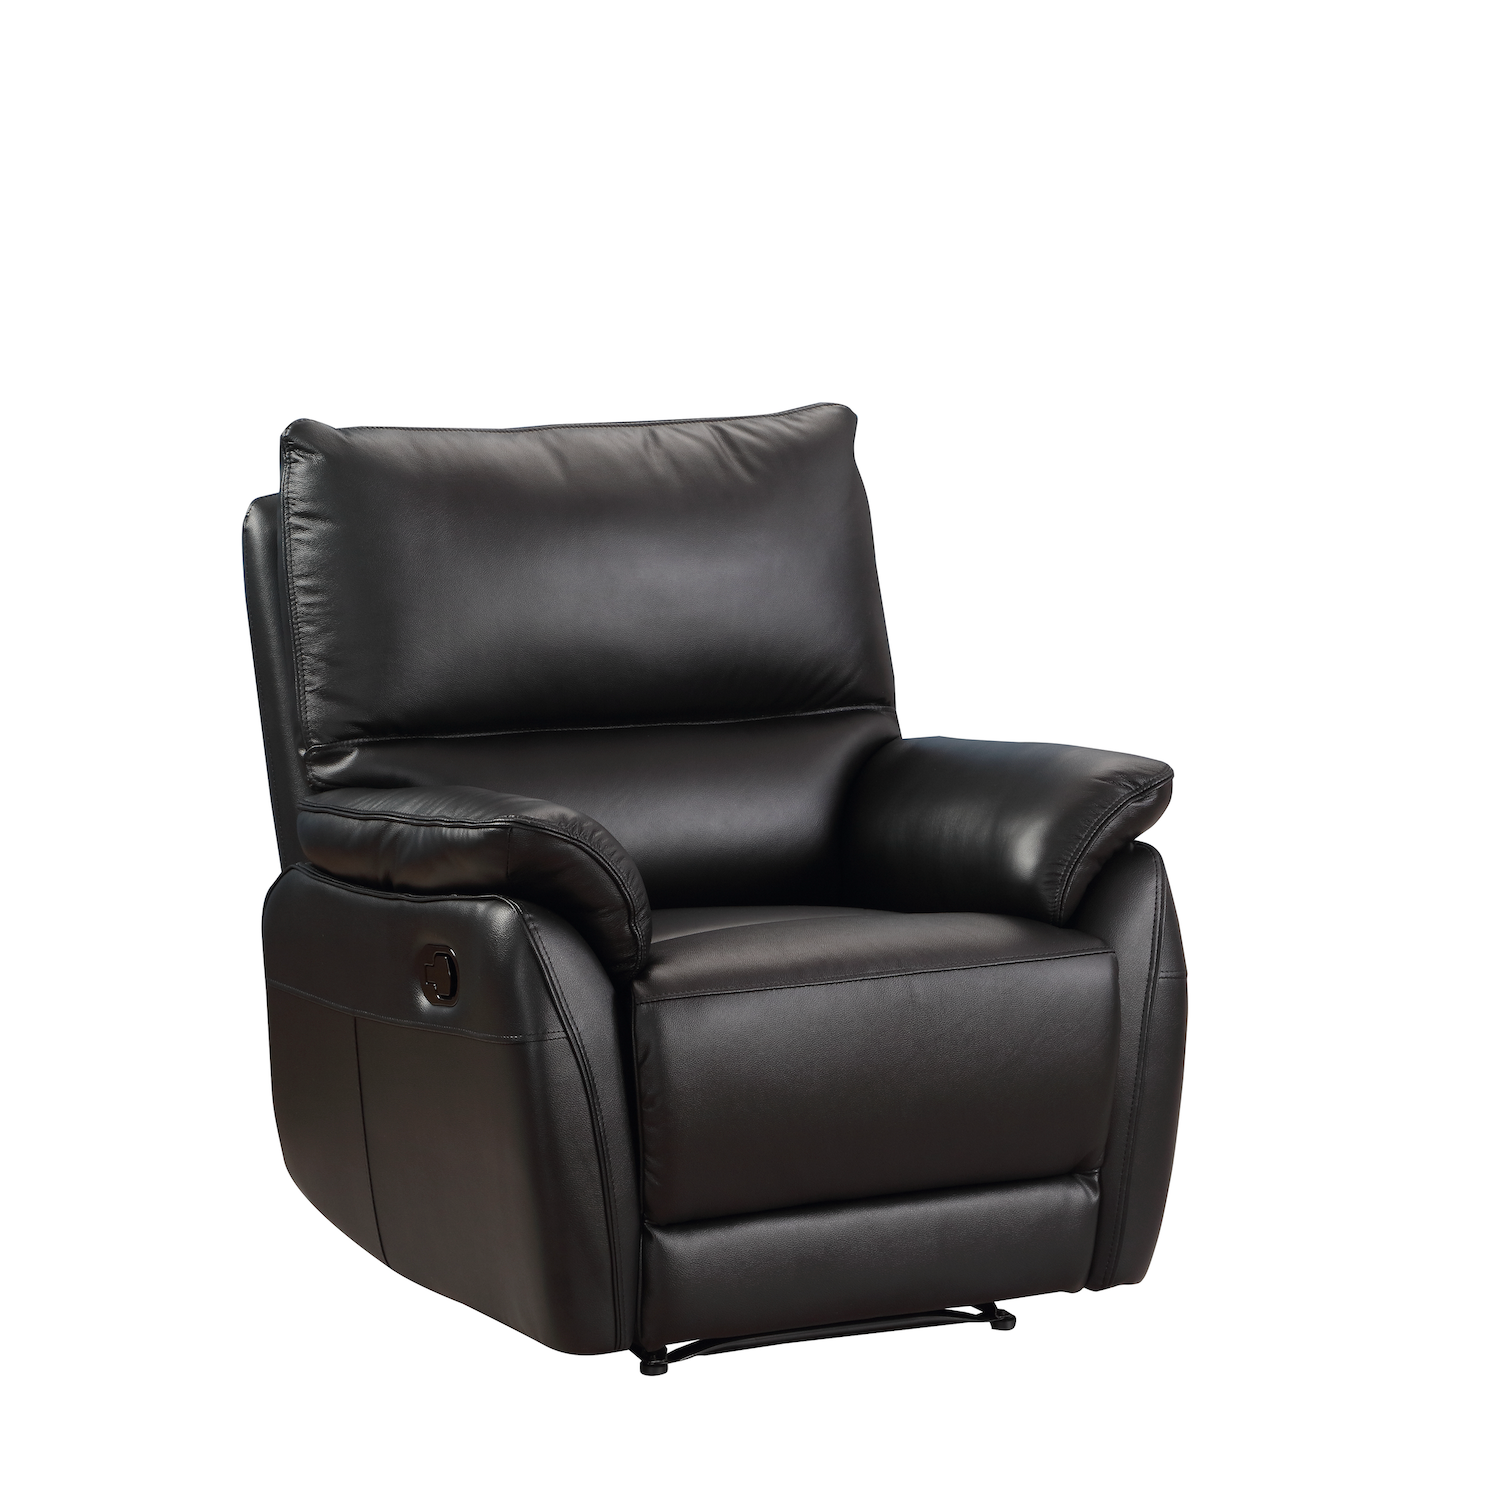 Esprit Manual Recliner Chair Black Leather